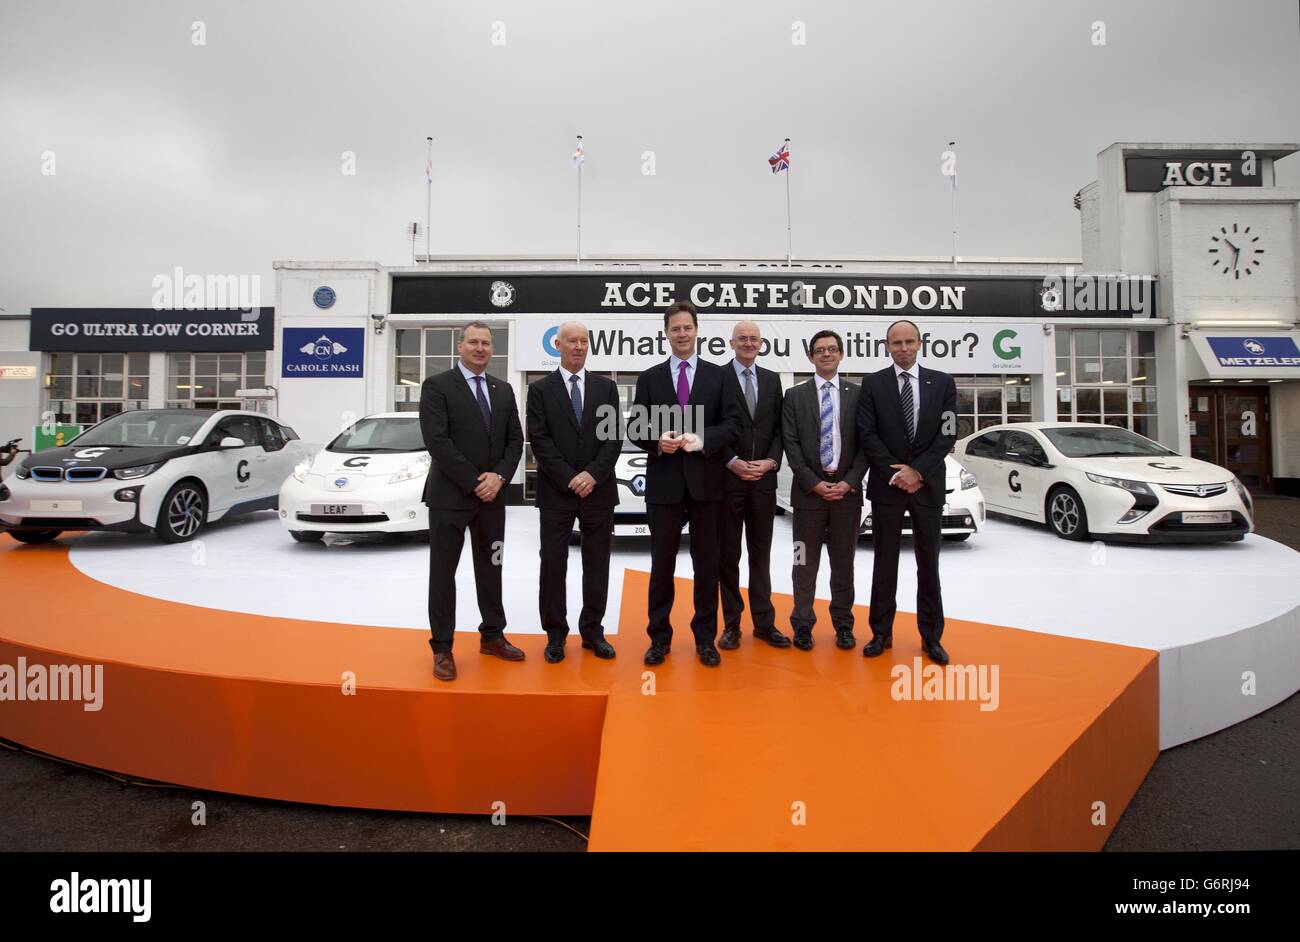 Deputy Prime Minister Nick Clegg (third left) with, from first left, Kenneth Ramirez UK Managing Director of Renault, Tim Abbott UK Managing Director of BMW, Jim Wright UK Managing Director of Nissan, James Taylor Fleet Director of Vauxhall and Matt Harrison President and Managing Director of Toyota, during a visit to the Ace Cafe in Stonebridge, northwest London, for the launch of the Go Ultra Low campaign. Stock Photo